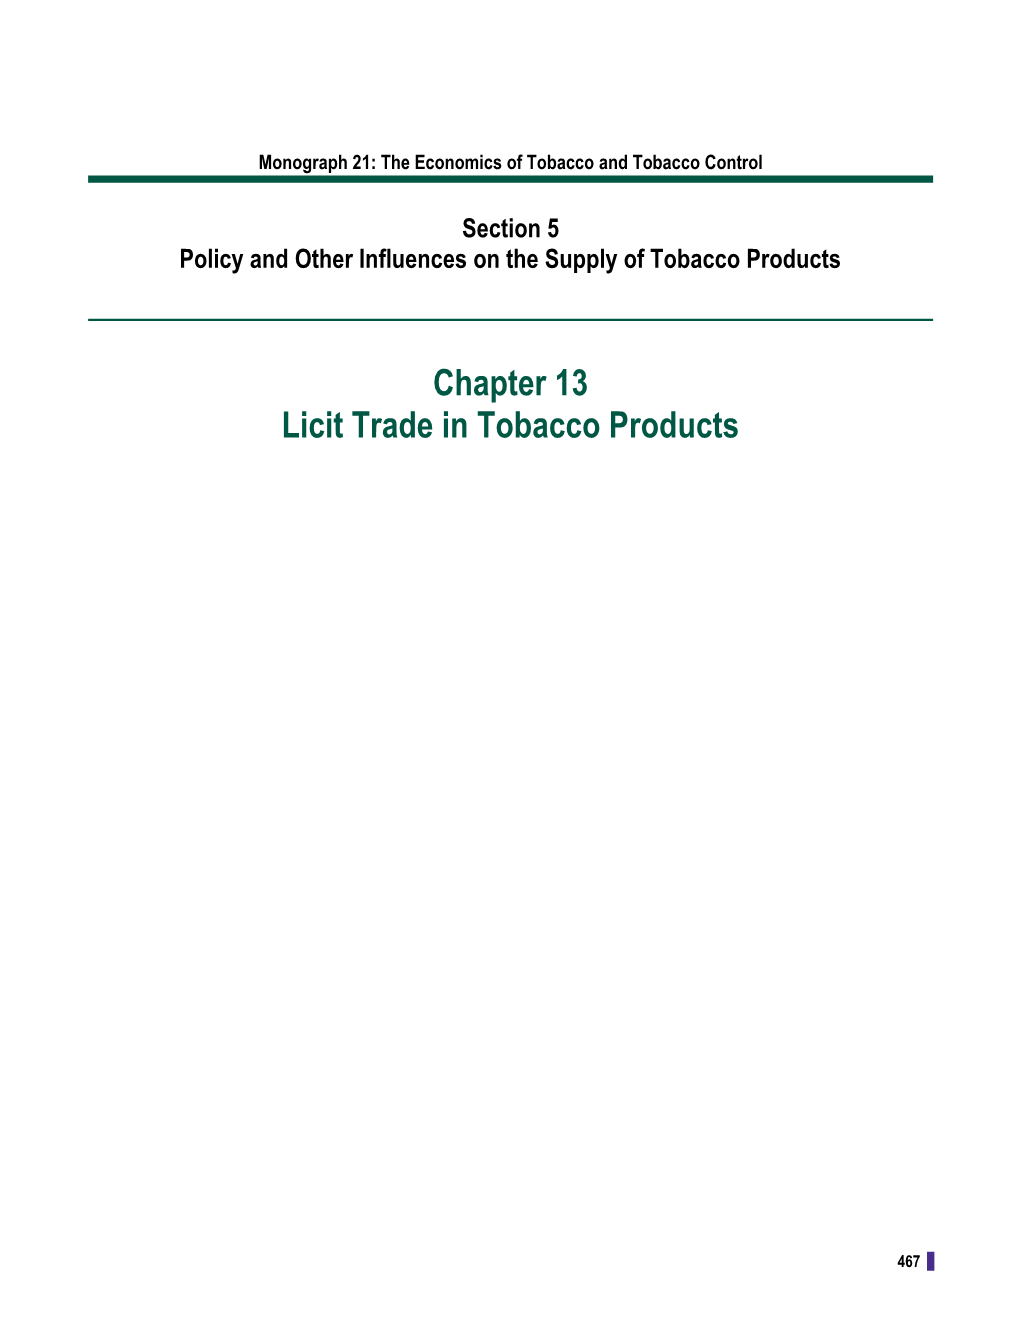 Licit Trade in Tobacco Products